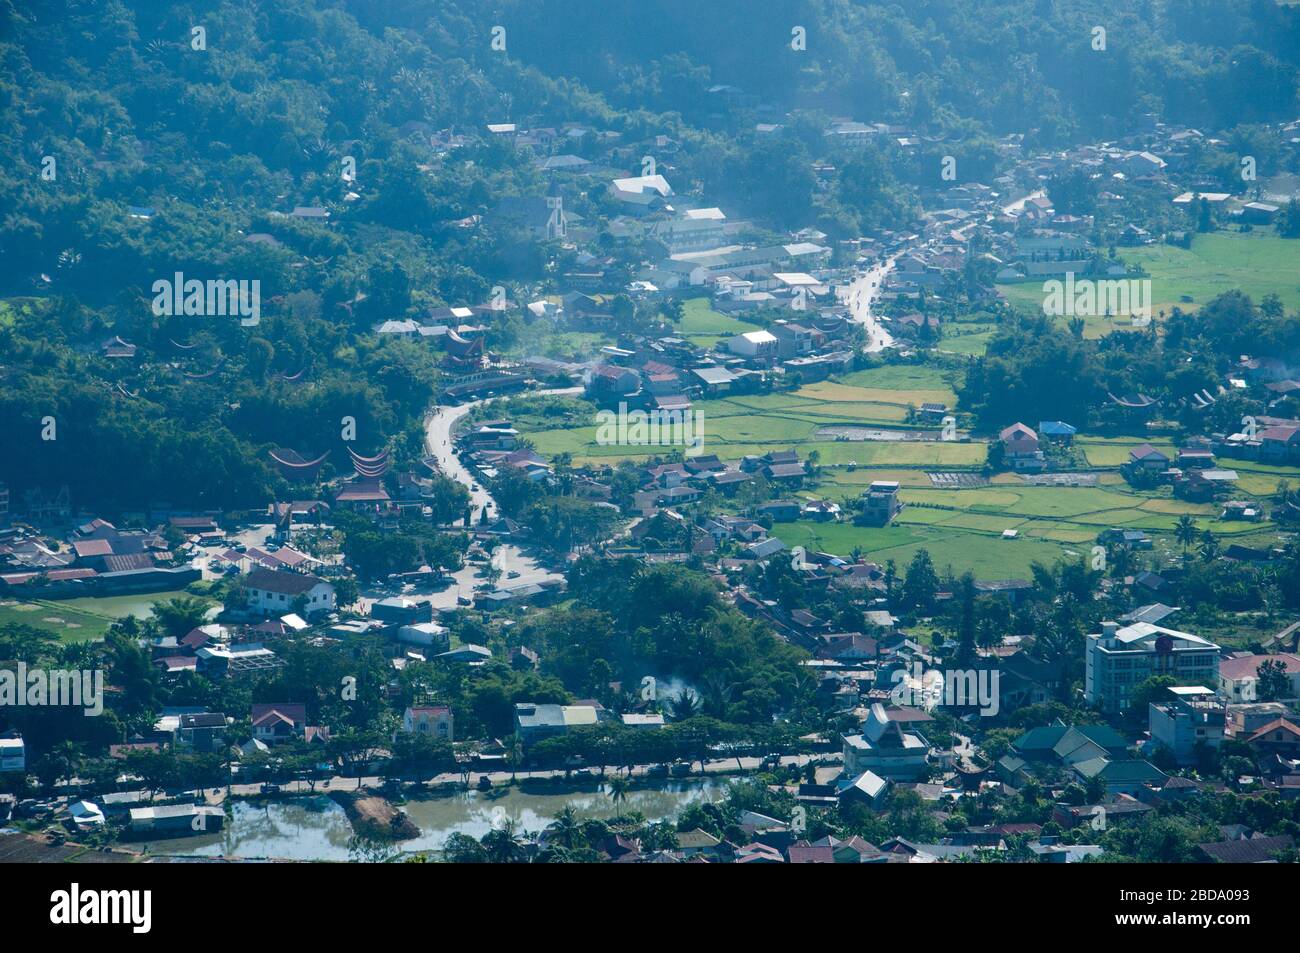 The view of Makale City as seen from Buntu Burake site.Tana Toraja located in South Sulawesi is one of the highlight of Indonesia tourism. The region Stock Photo